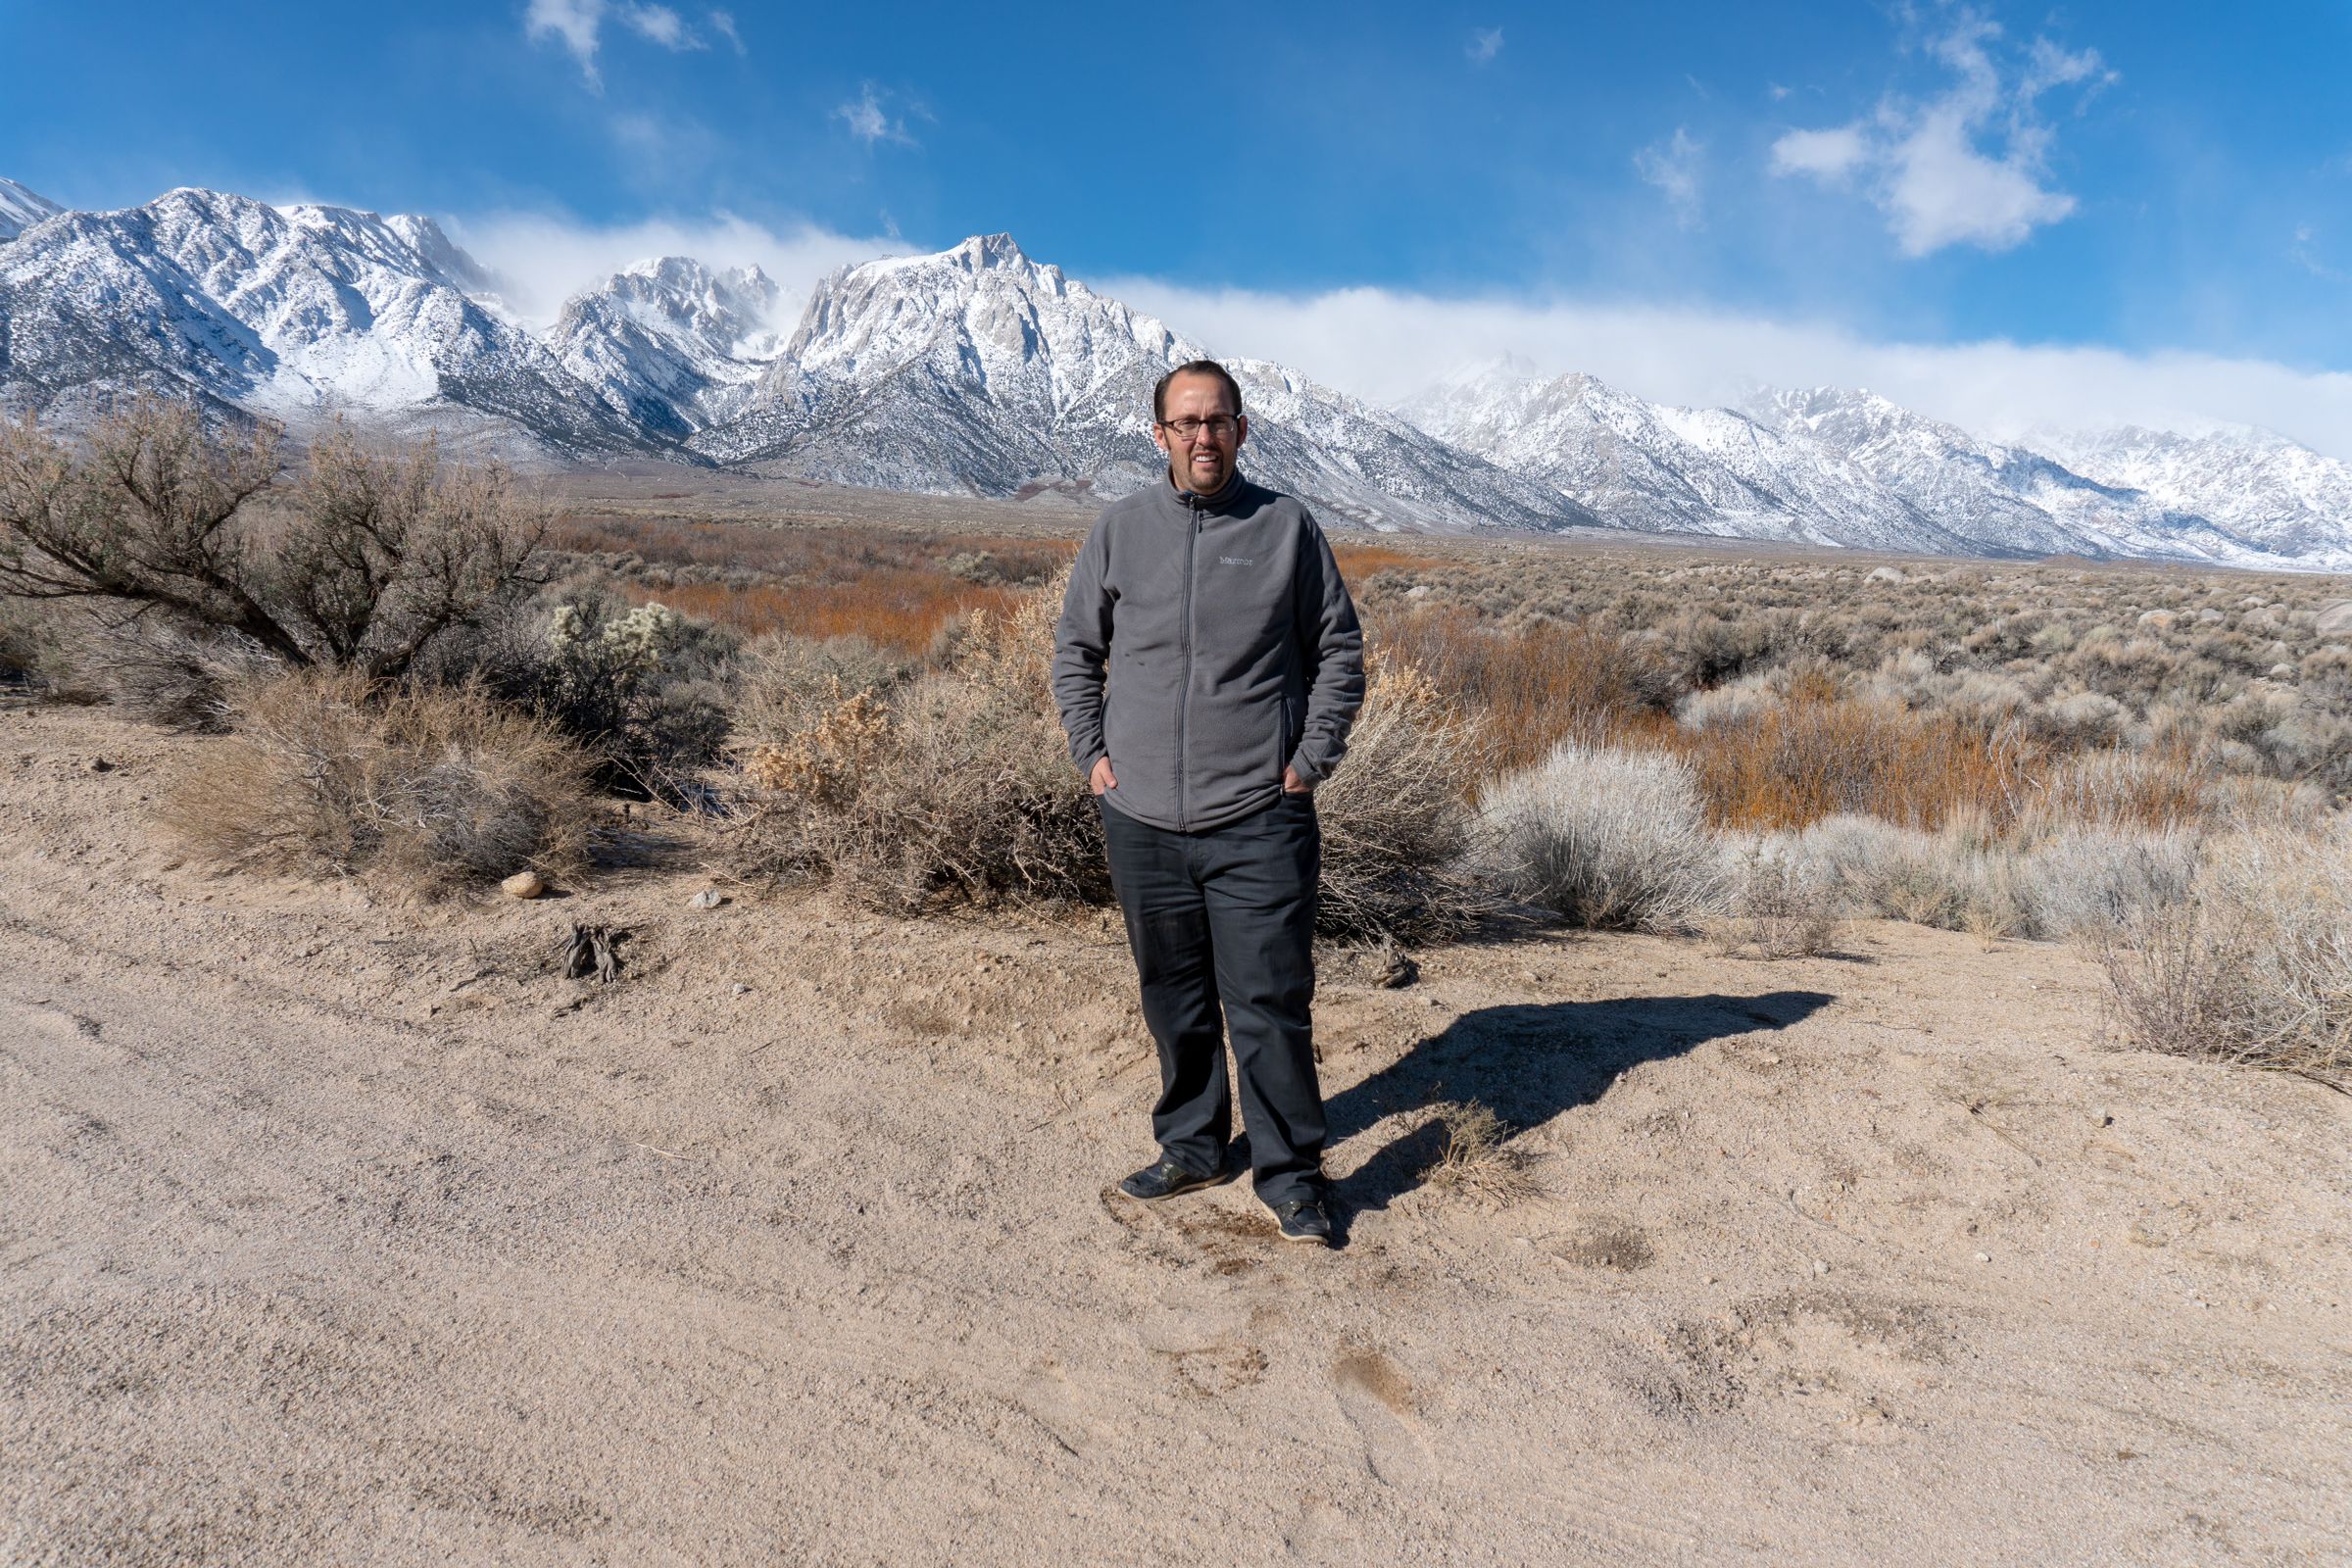 Mount Whitney and me from the Alabama Hills - and me